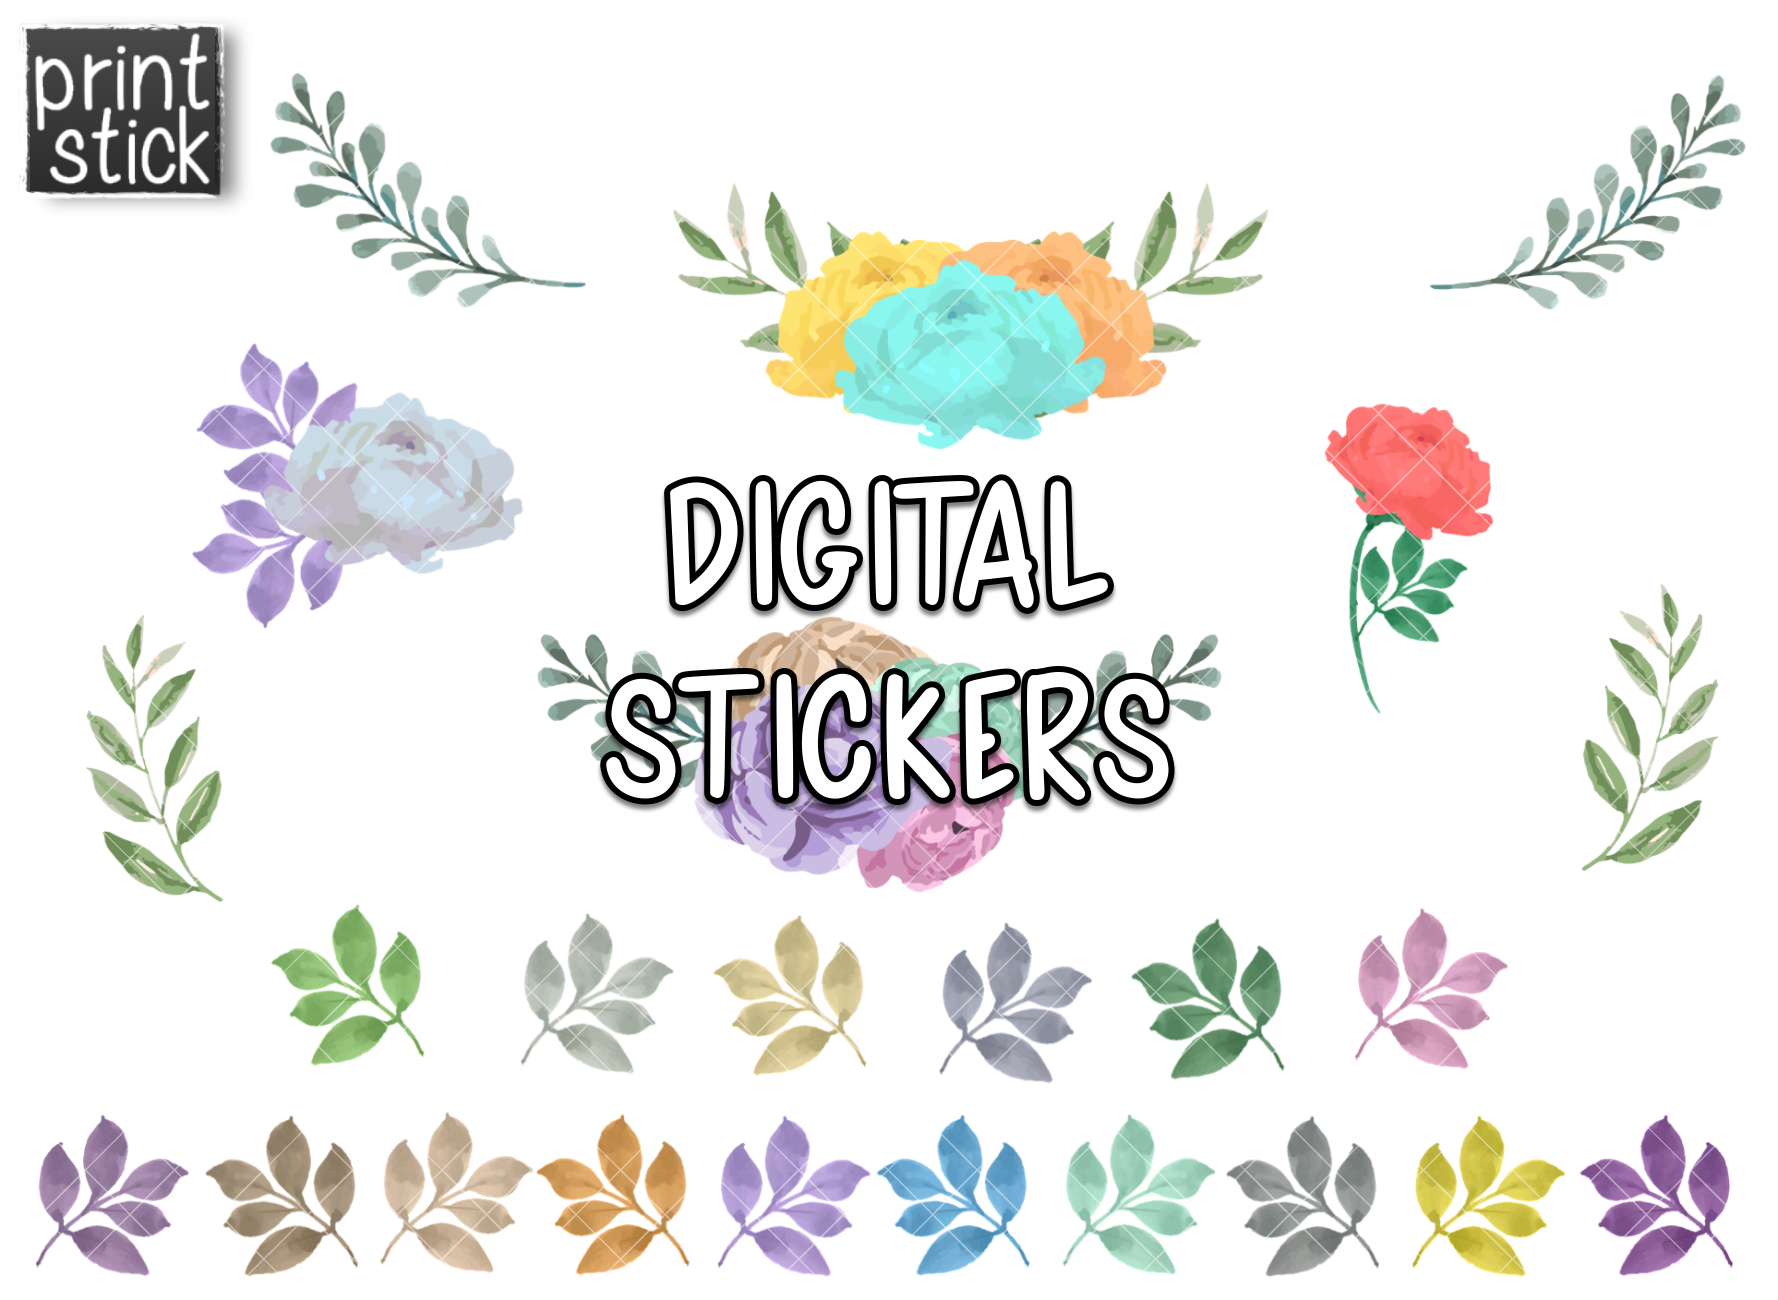 SS Watercolor Florals 1 Digital Planner Stickers - Print Stick